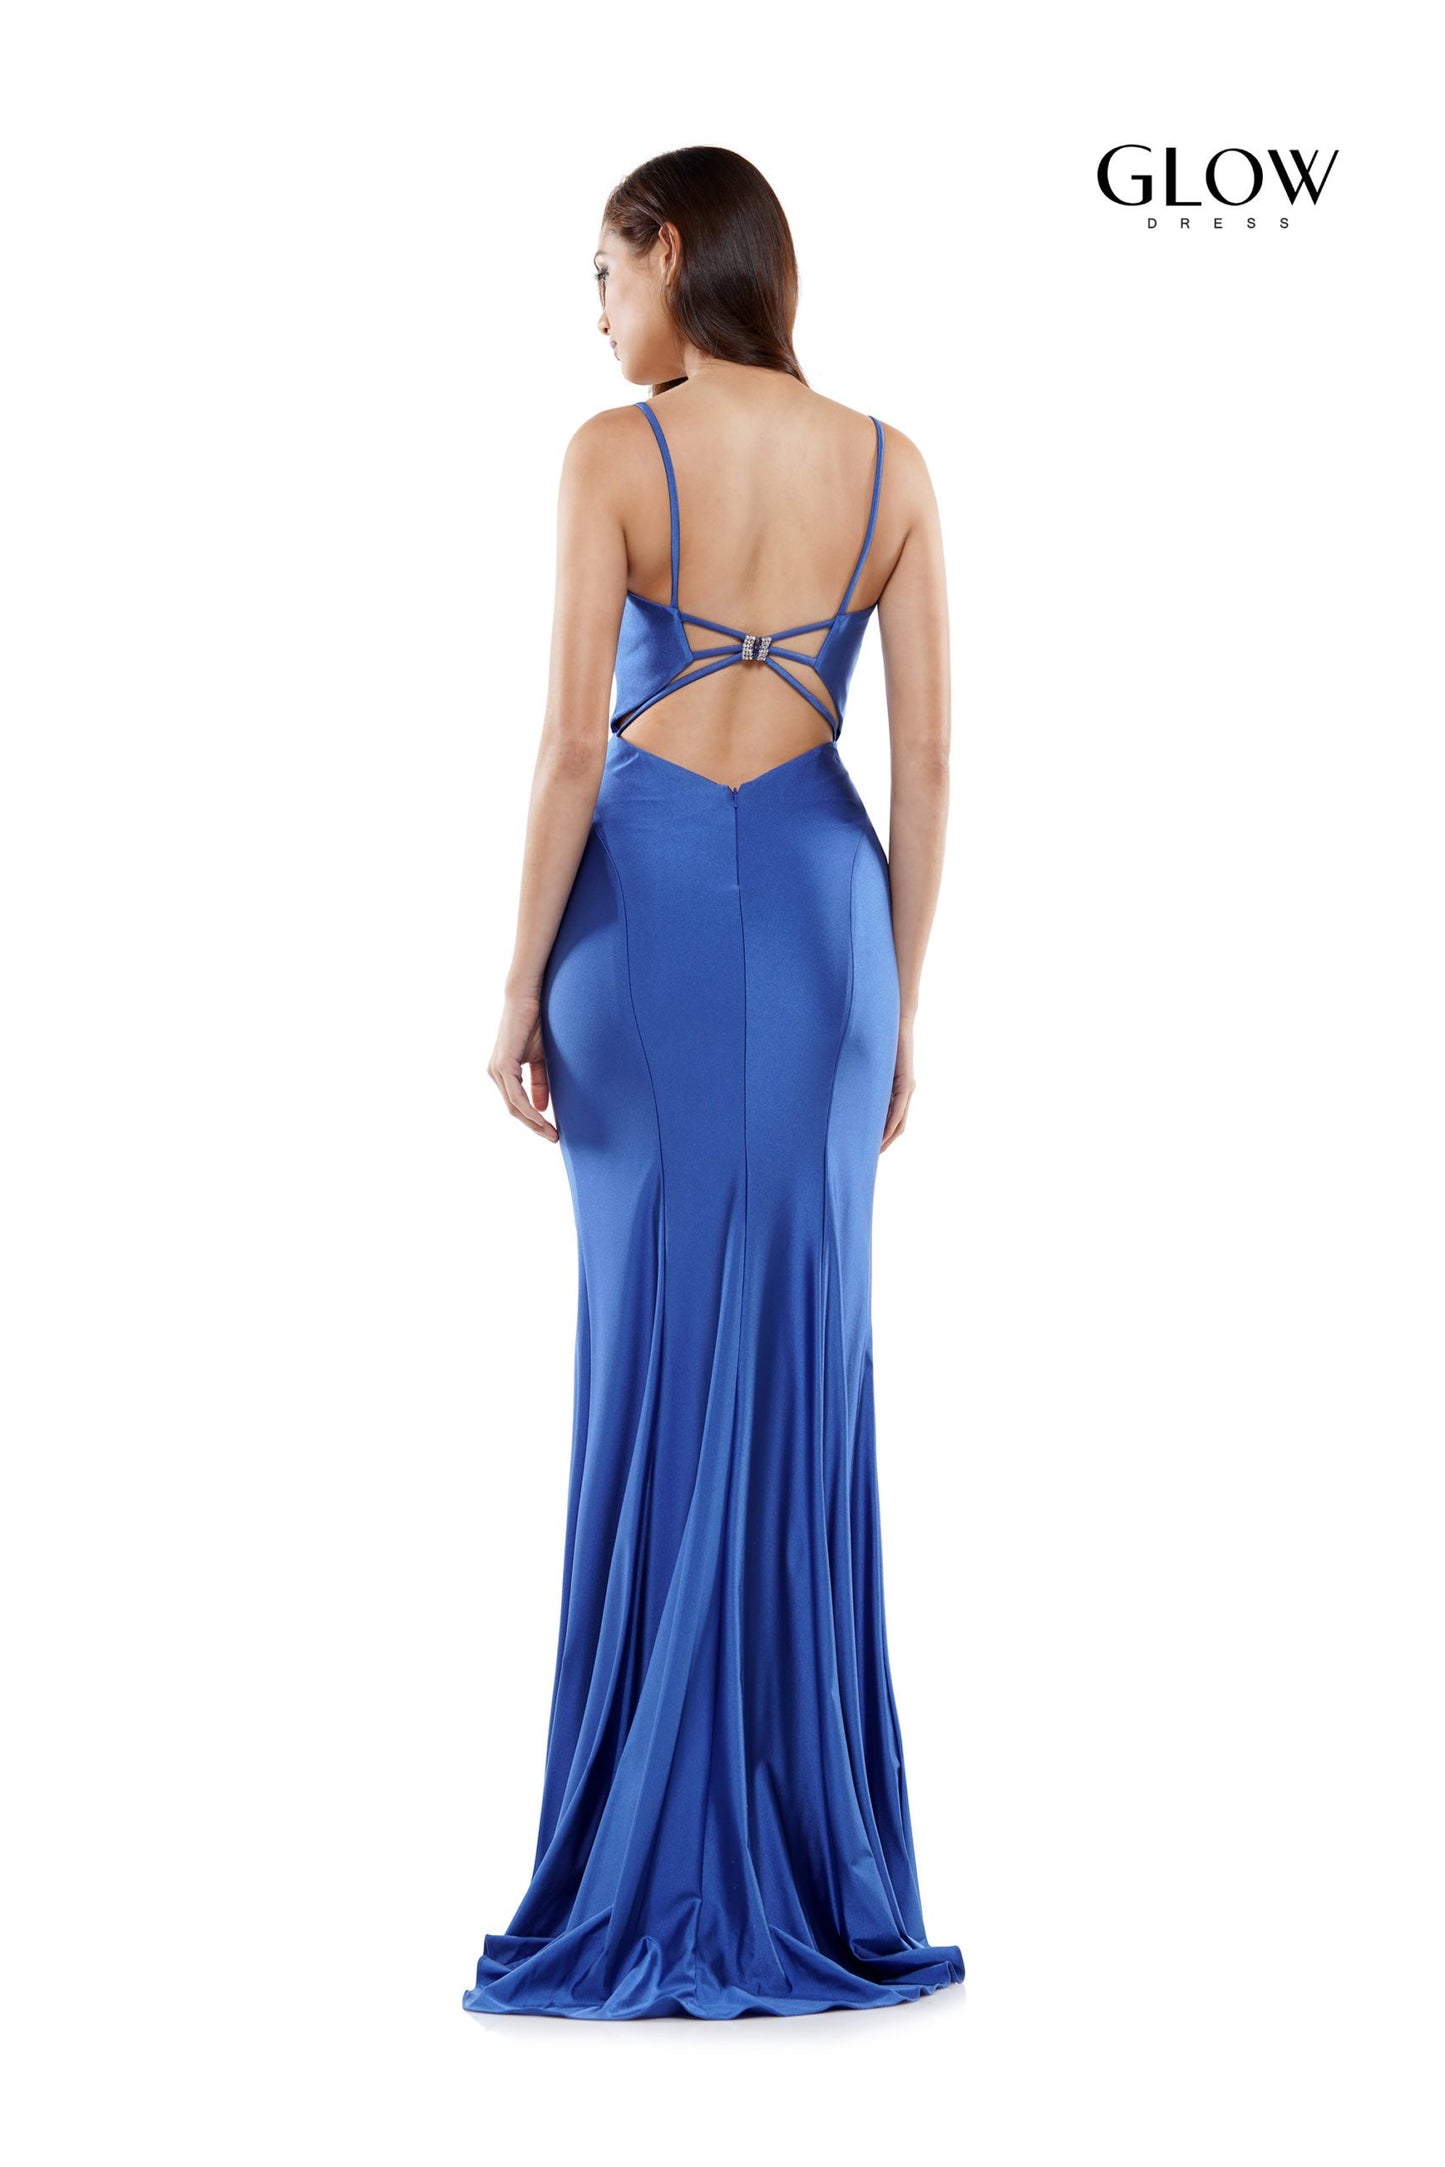 Colors G990 Long Fitted stretch V Neck formal prom dress Slit backless 46″ lycra fit and flare dress, front slit, plunged  Available Sizes: 0-20  Available Colors: Light Blue, Red, Royal, Hot Pink